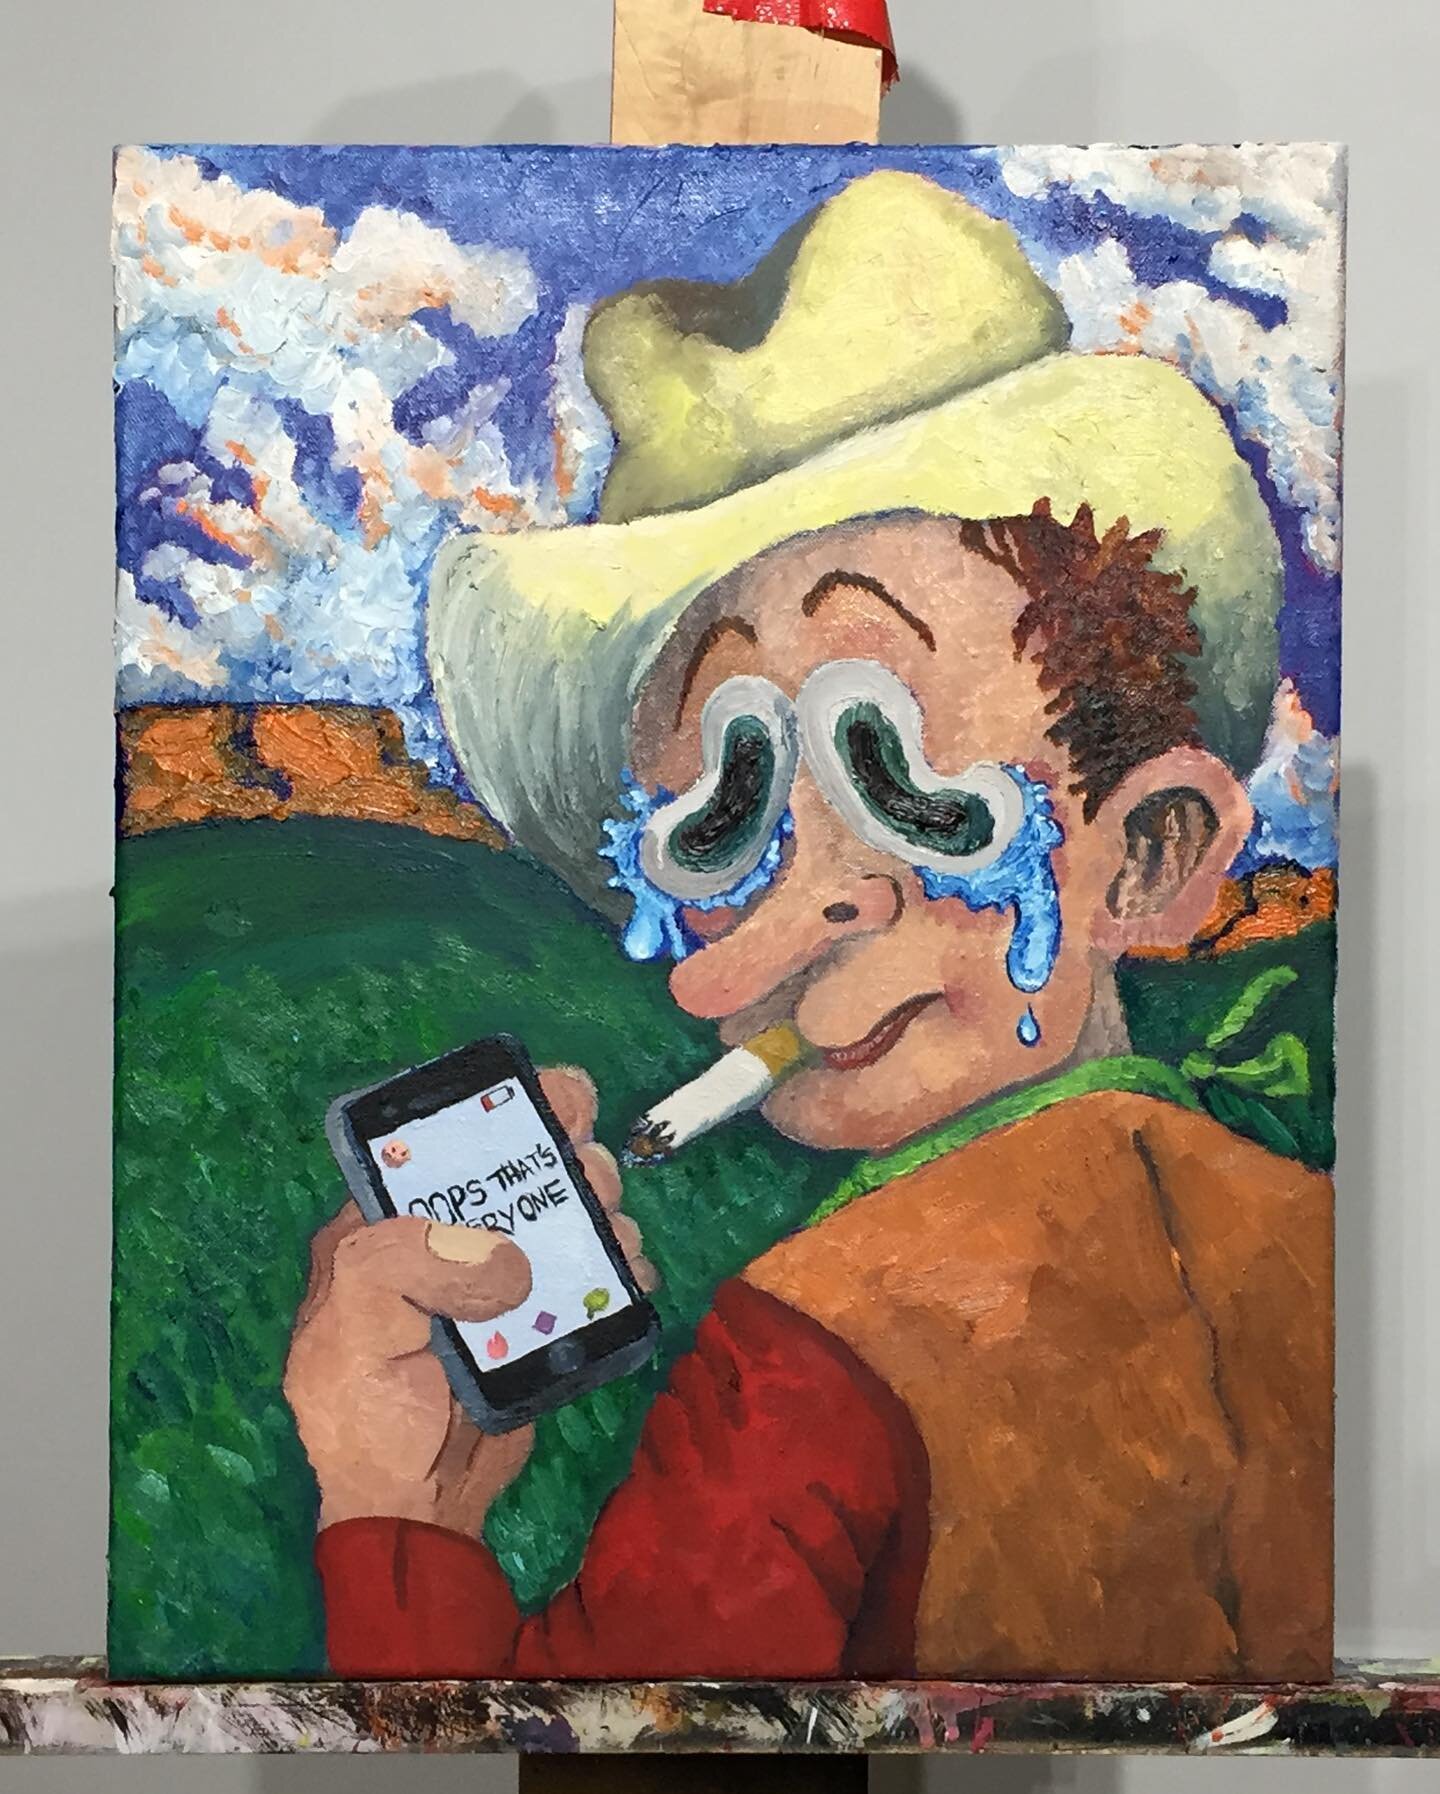 Three Amigos 🤠🤠🤠

Also this my submission for the NAP Emerging Artist grant. Fingers crossed and enjoy the cowpokes ✌️

1.) &ldquo;Sad Lonely Cowboy&rdquo;, 16 x 20, oil paint on canvas, 2021
2.) &ldquo;Off to the Horizon&rdquo;, 16 x 20, oil pain